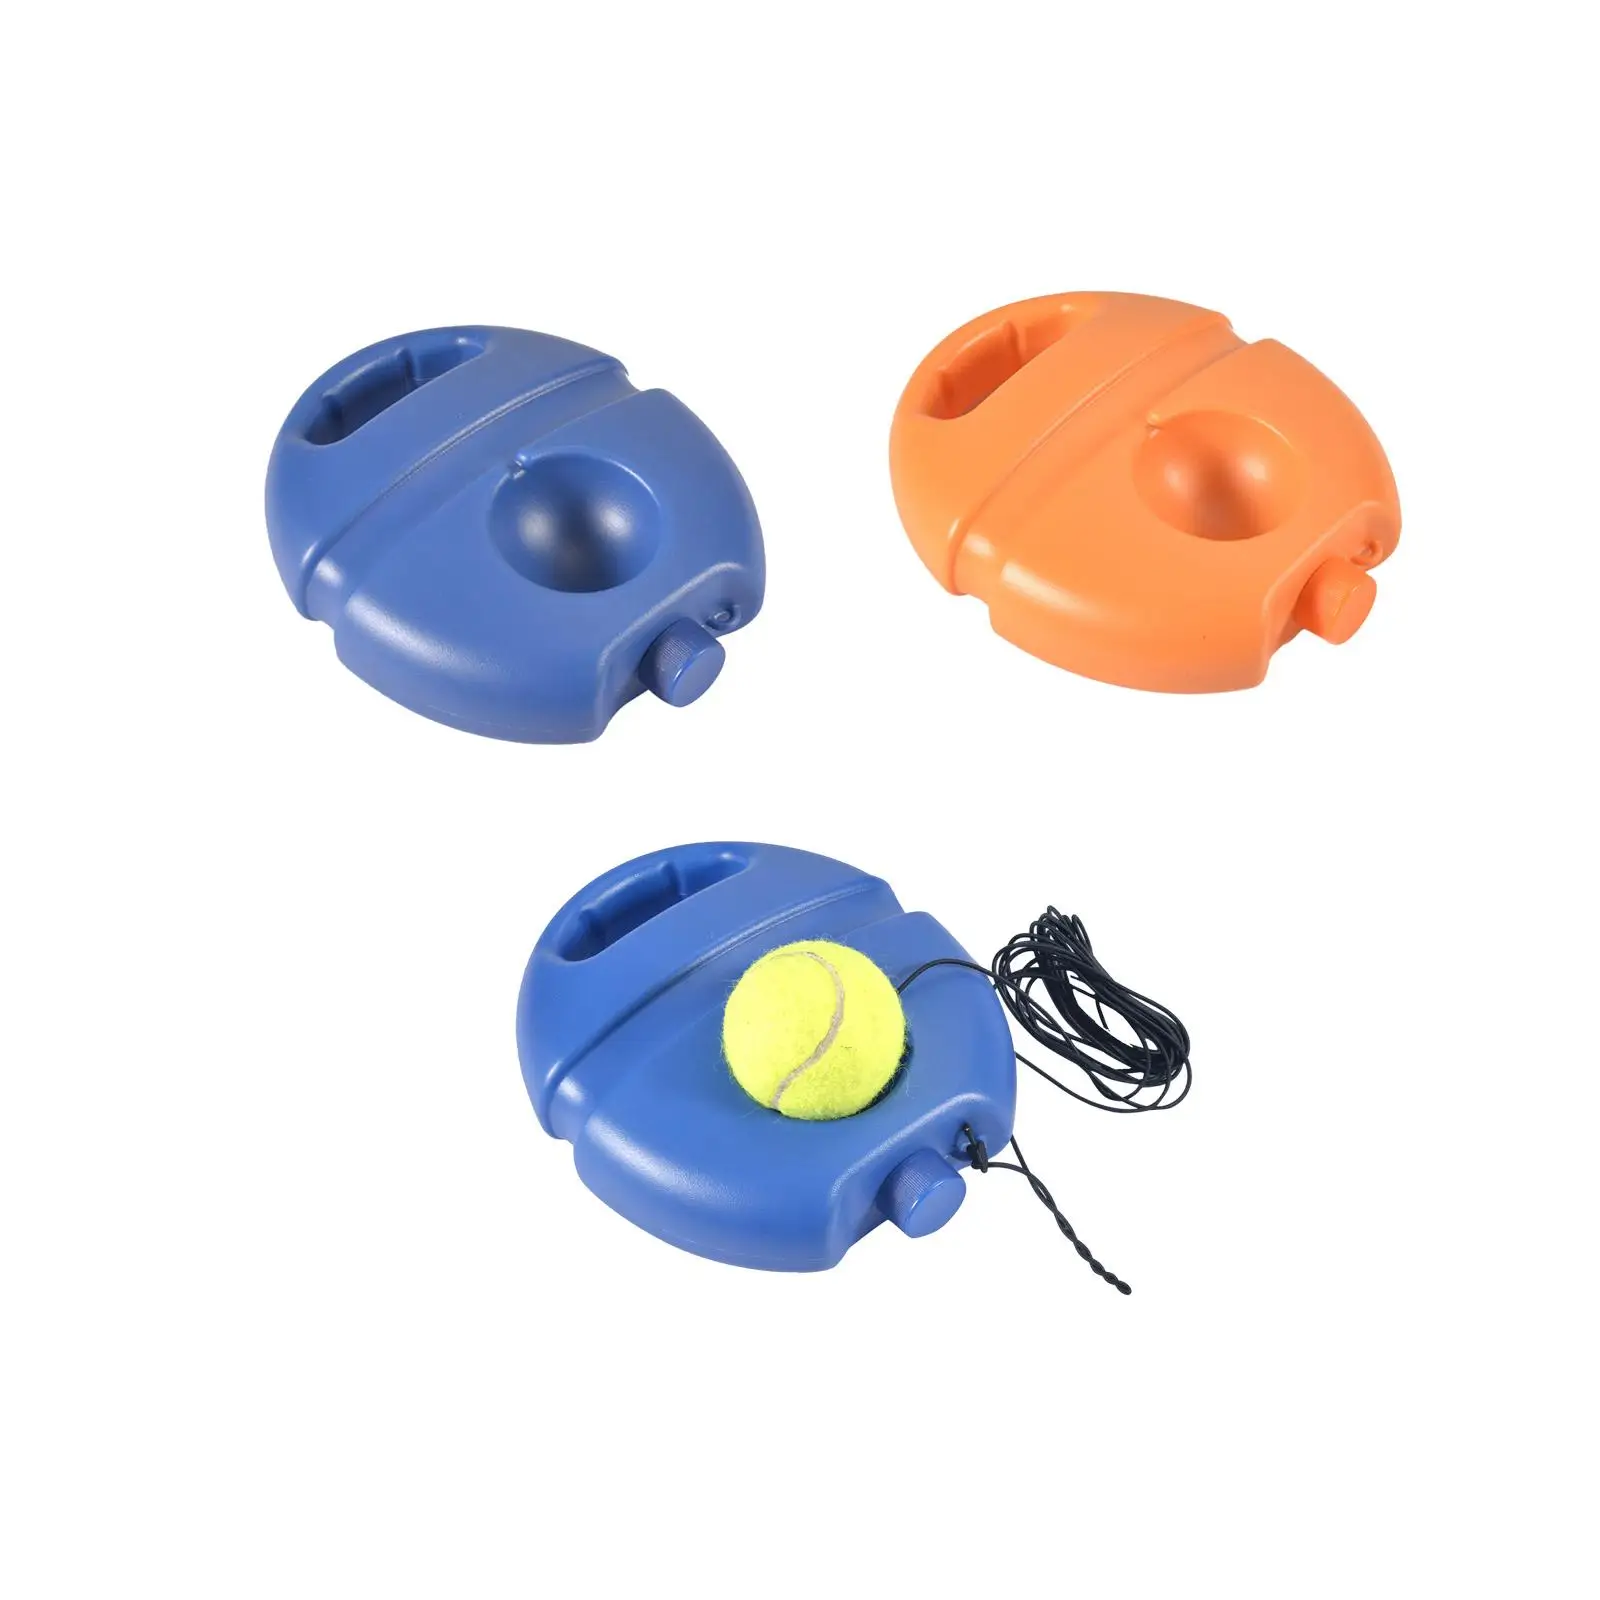 Tennis Trainer Base Pickleball Trainer for Sports Outdoor Beginners Practice